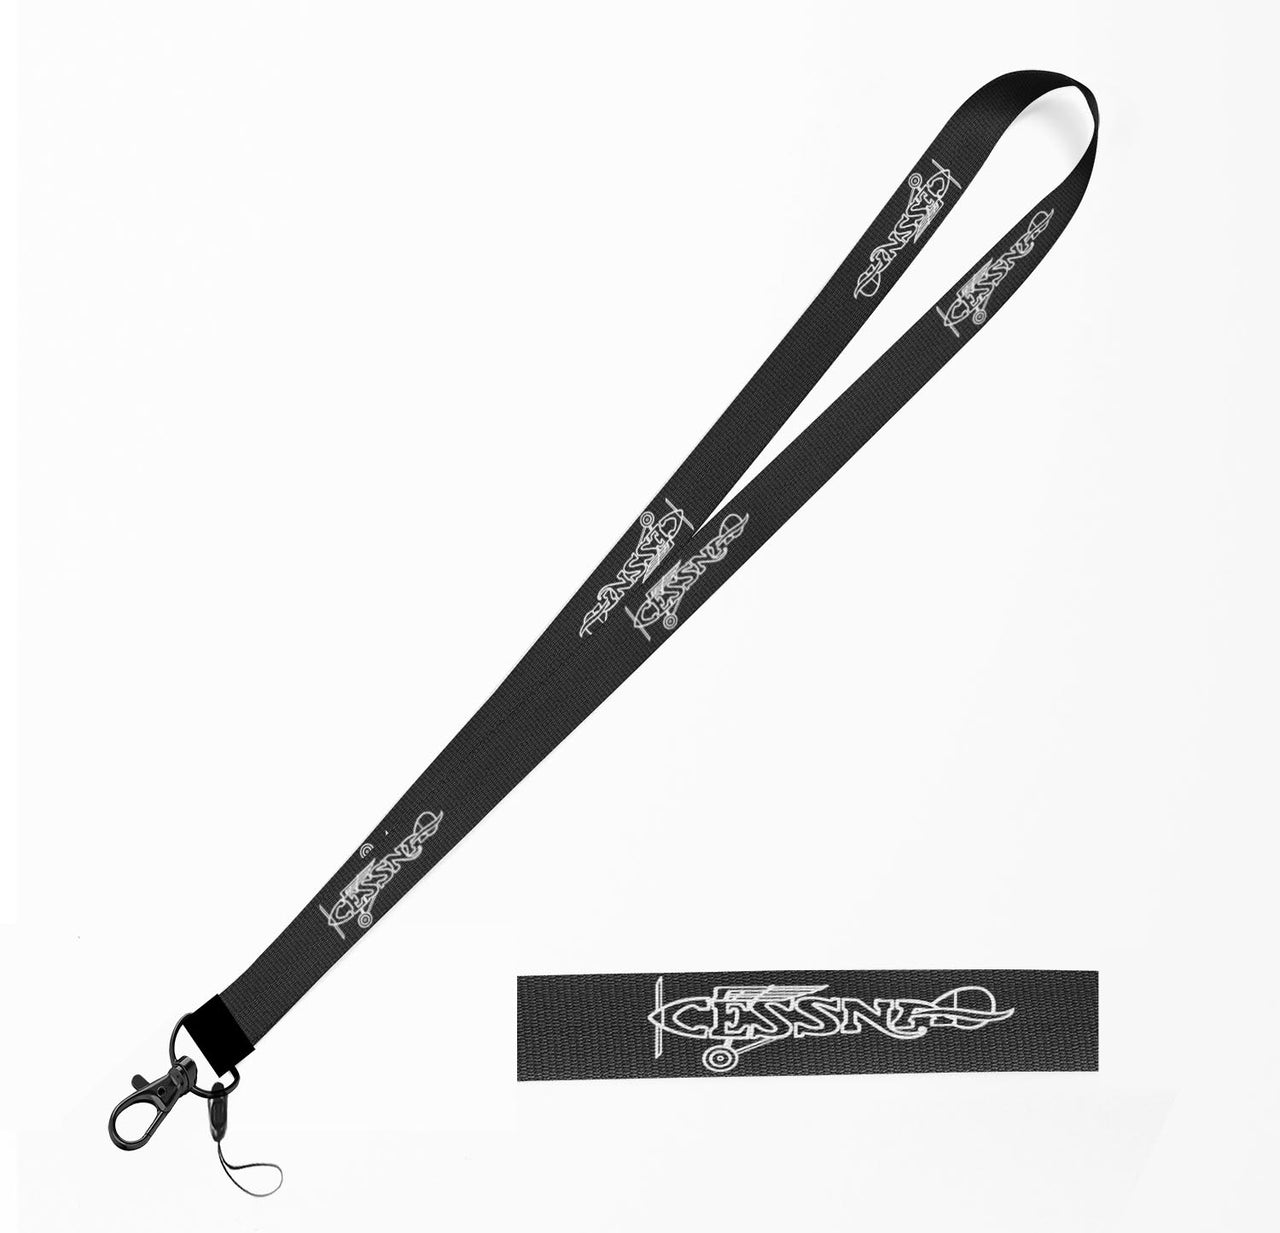 Special Cessna Text Designed Lanyard & ID Holders